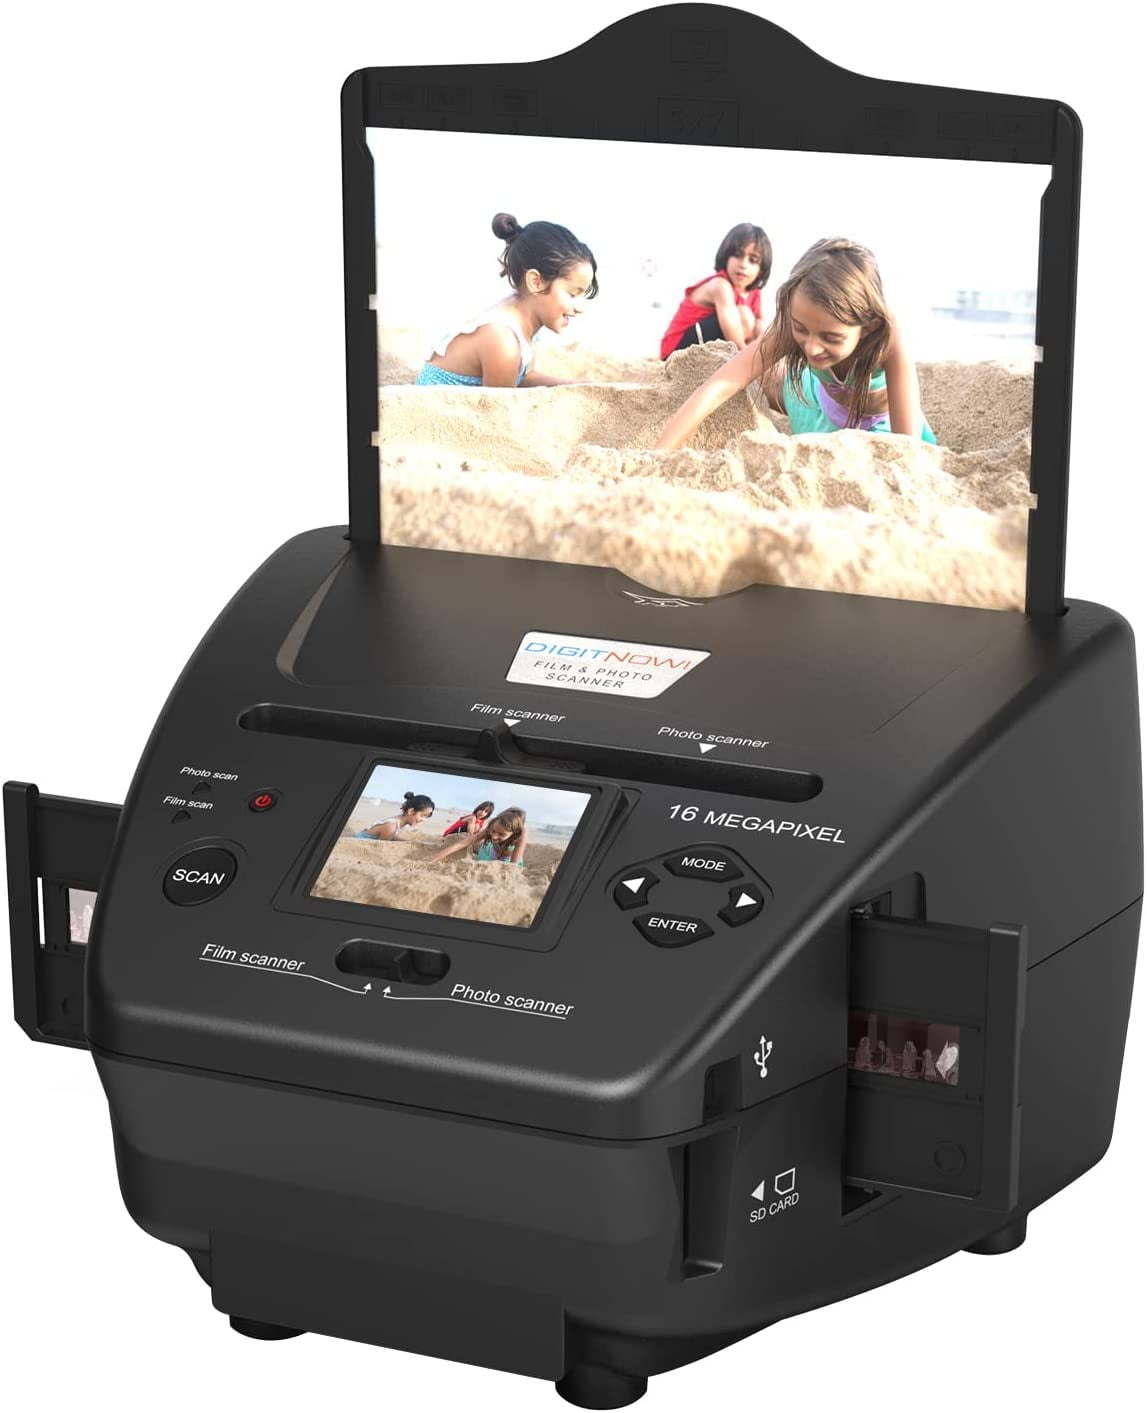 Film & Photo 4-in-1 Film Scanner, with 2.4" LCD Screen Converts 35mm/135 Slides & Negatives Film, Photo, Business Card for Saving to 16MP Digital Images, 8GB Memory Card Included